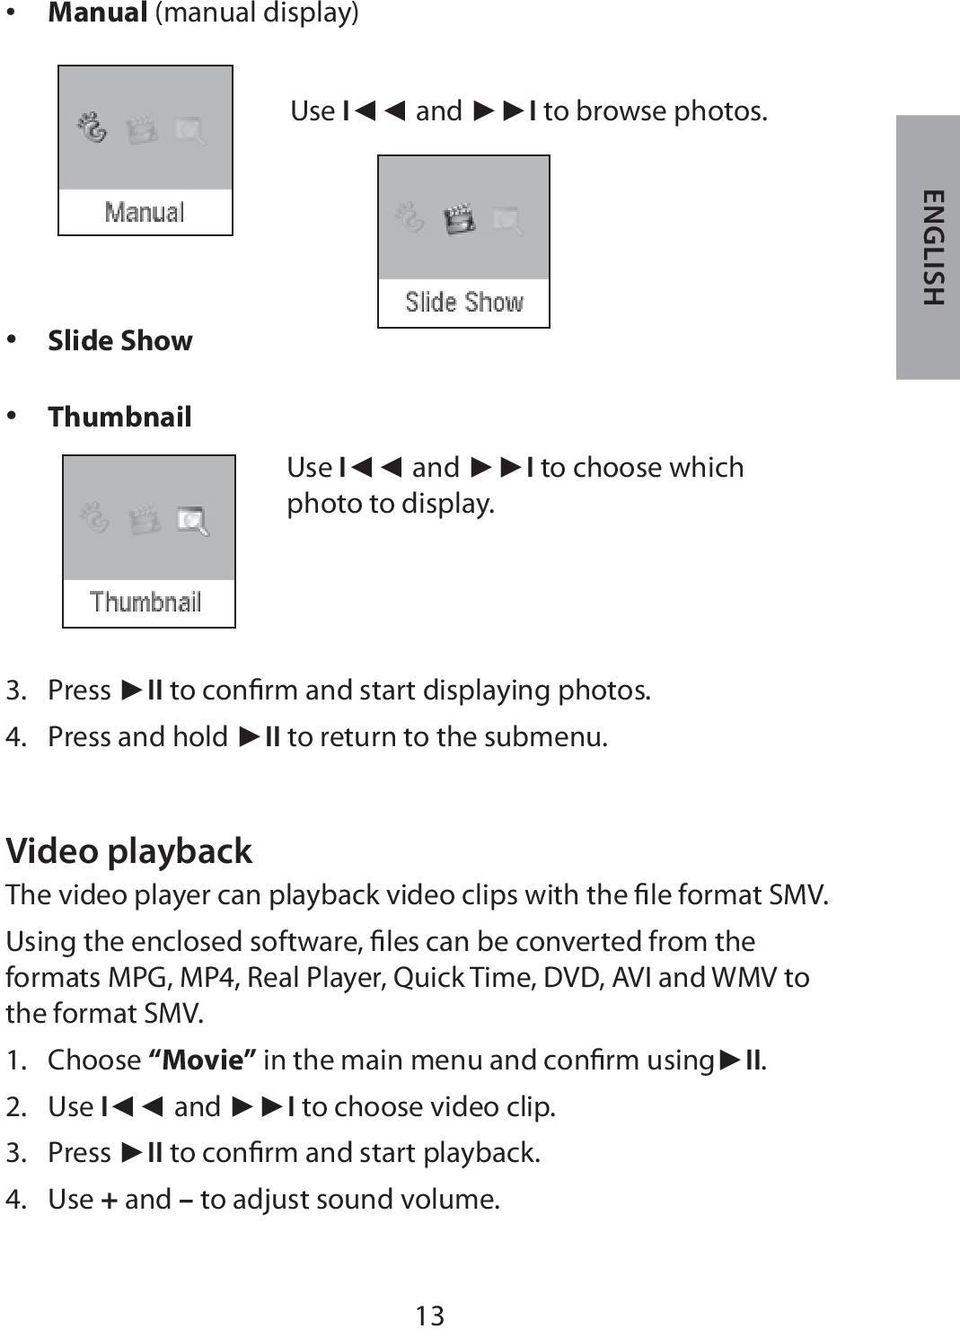 Video playback The video player can playback video clips with the file format SMV.